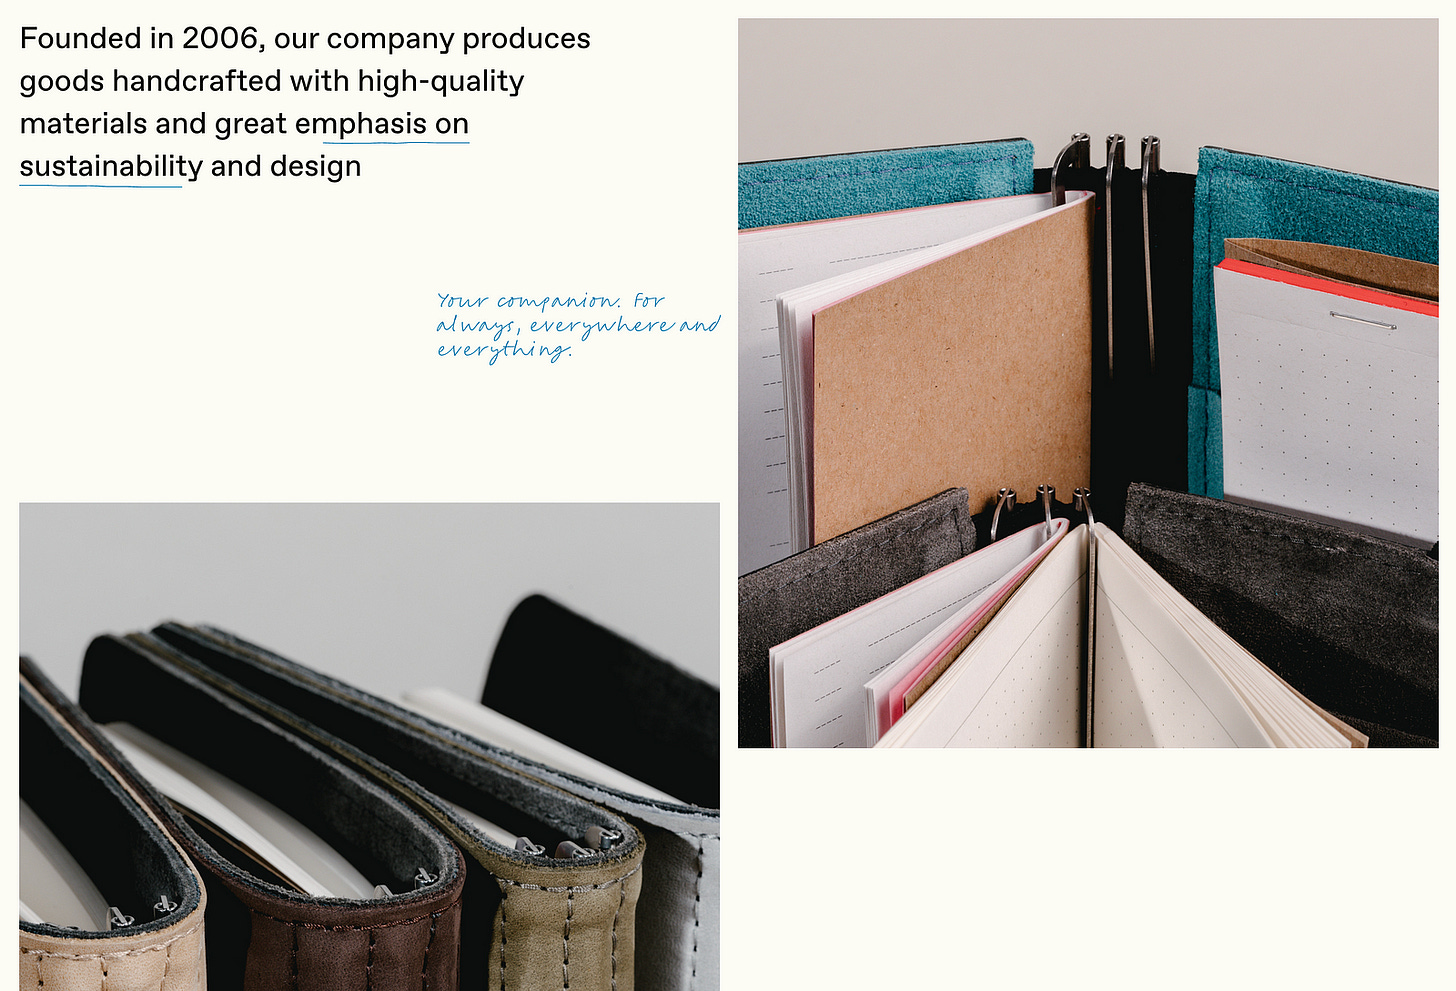 Screenshot from the Roterfaden website, showing closeups of various notebook covers and the notebooks that go inside them. Text reads: Founded in 2006, our company produced goods handcrafted with high-quality materials and great emphasis on sustainability and design. Your companion, for always, everywhere and everything.